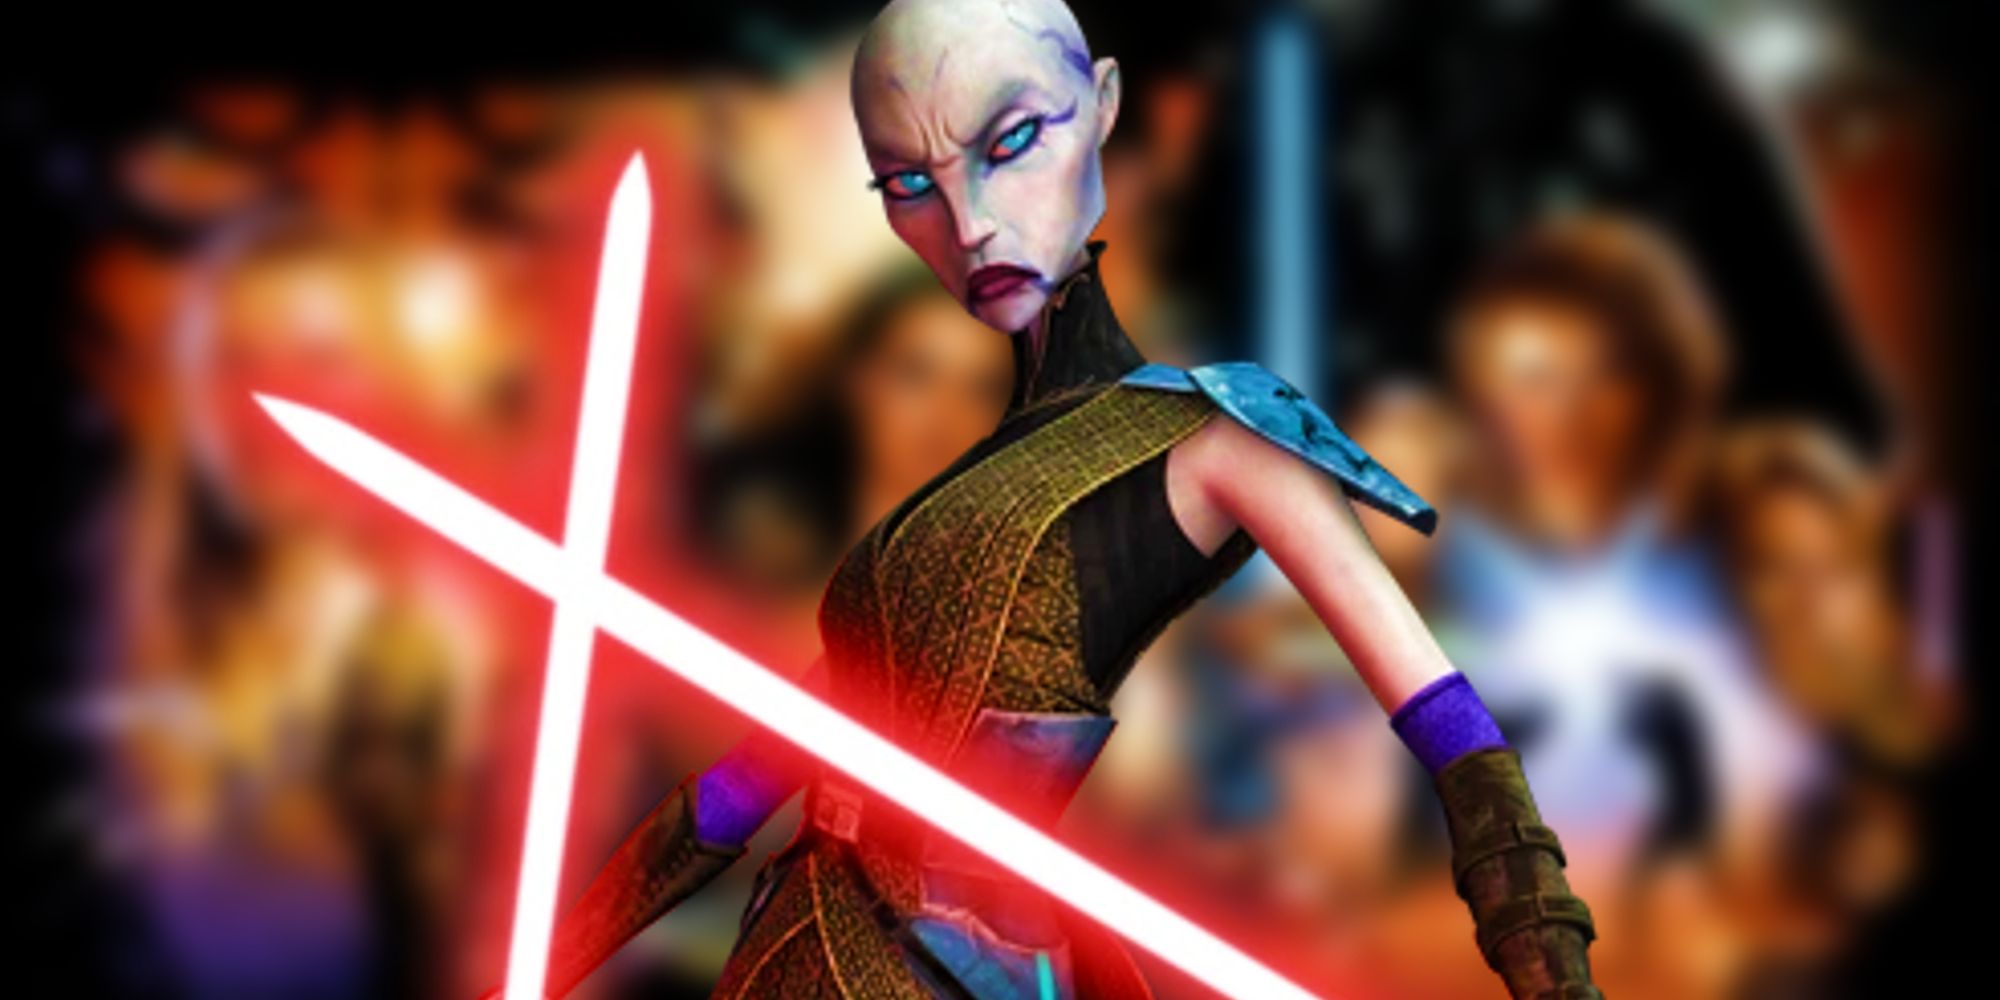 A blurred image of the Star Wars prequel posters behind Asajj Ventress wielding her red lightsabers from Star Wars: The Clone Wars